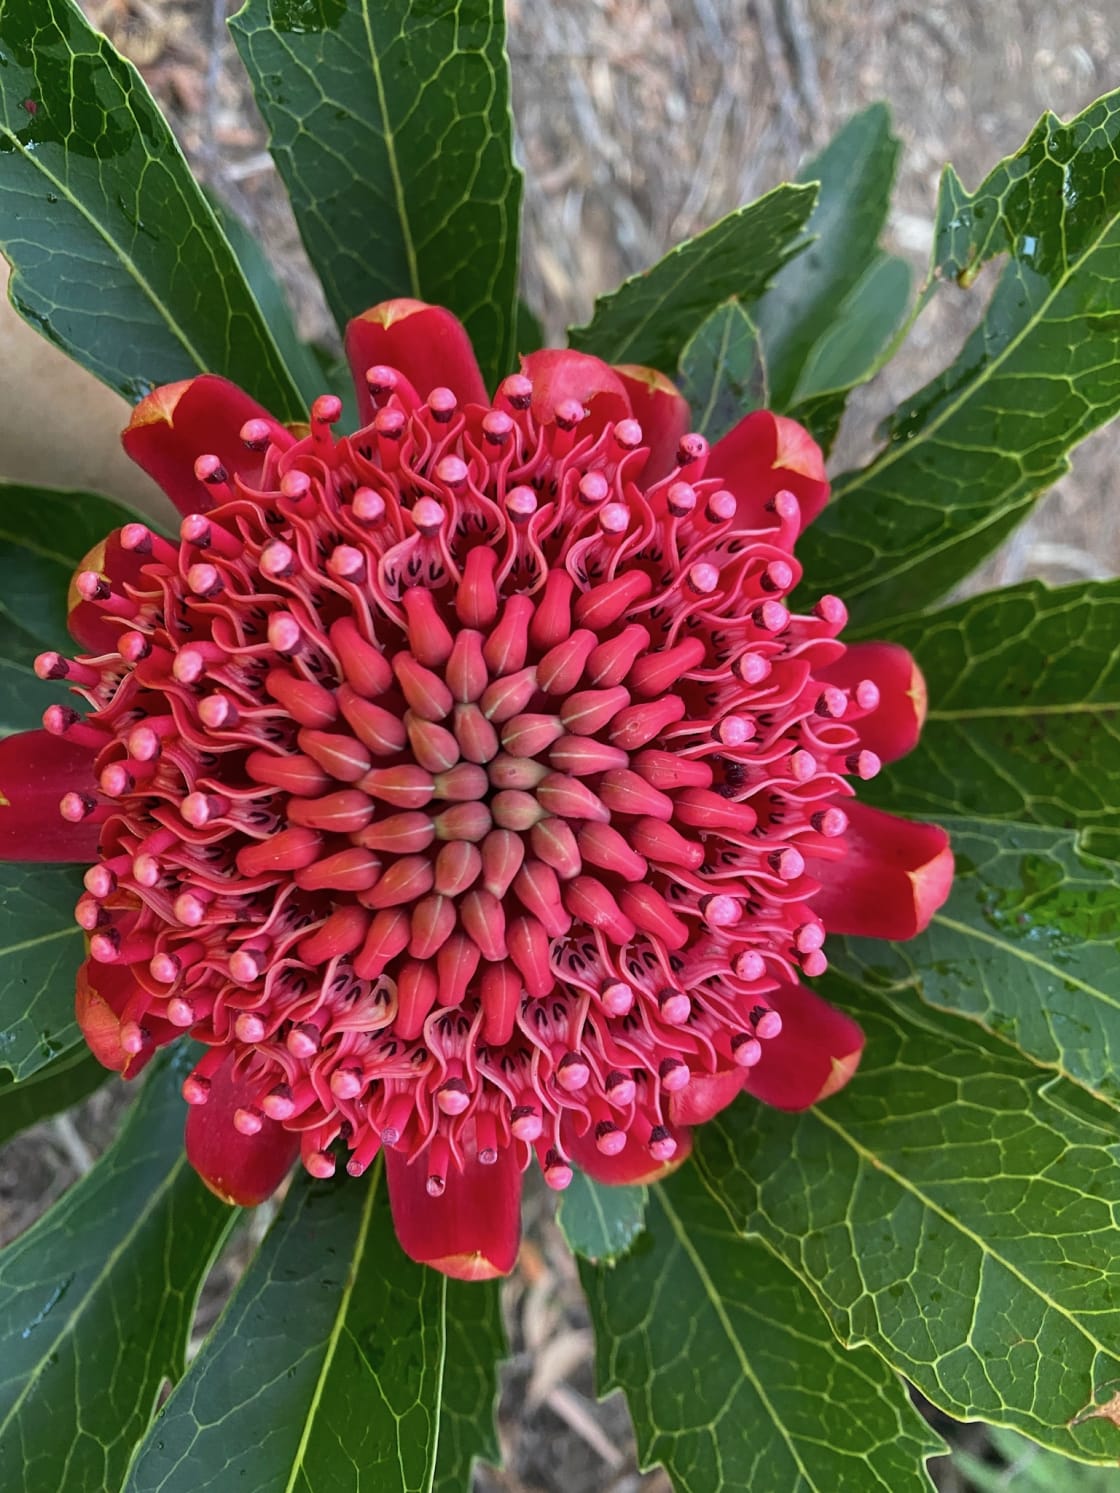 We have hundreds of flowering Waratahs every year in September.